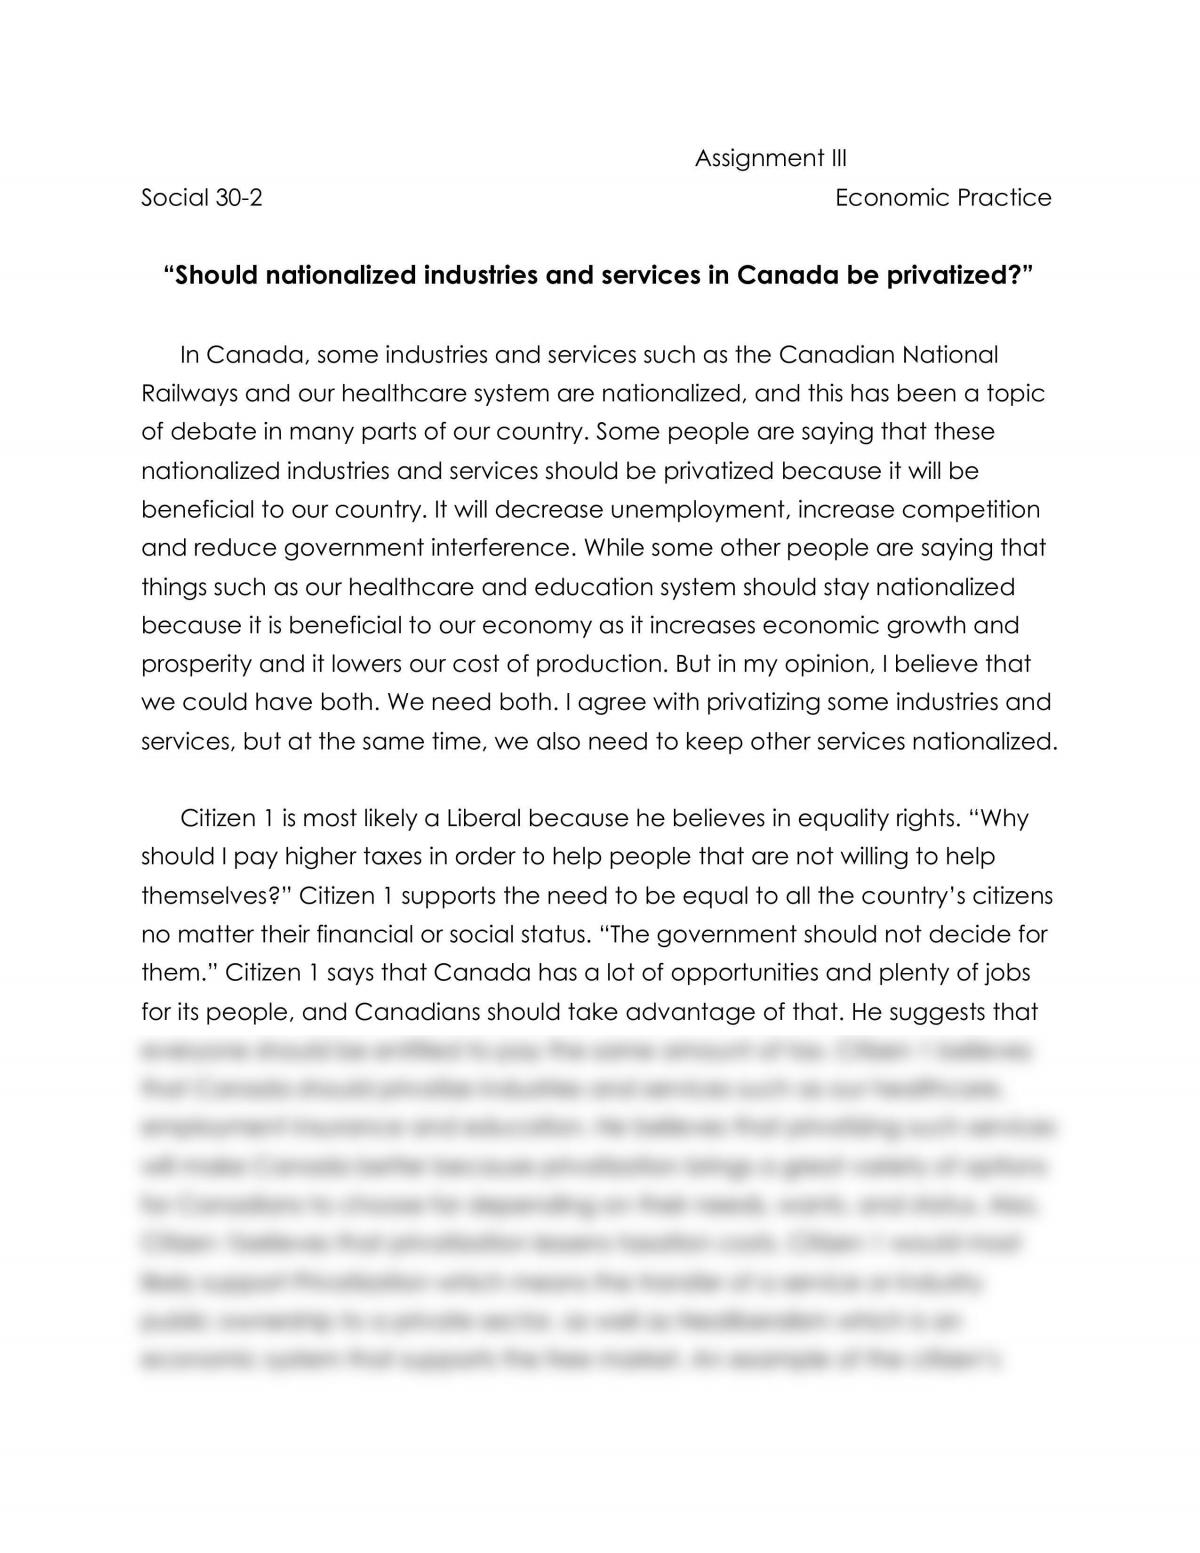 Should nationalized industries and services in Canada be privatized? - Page 1